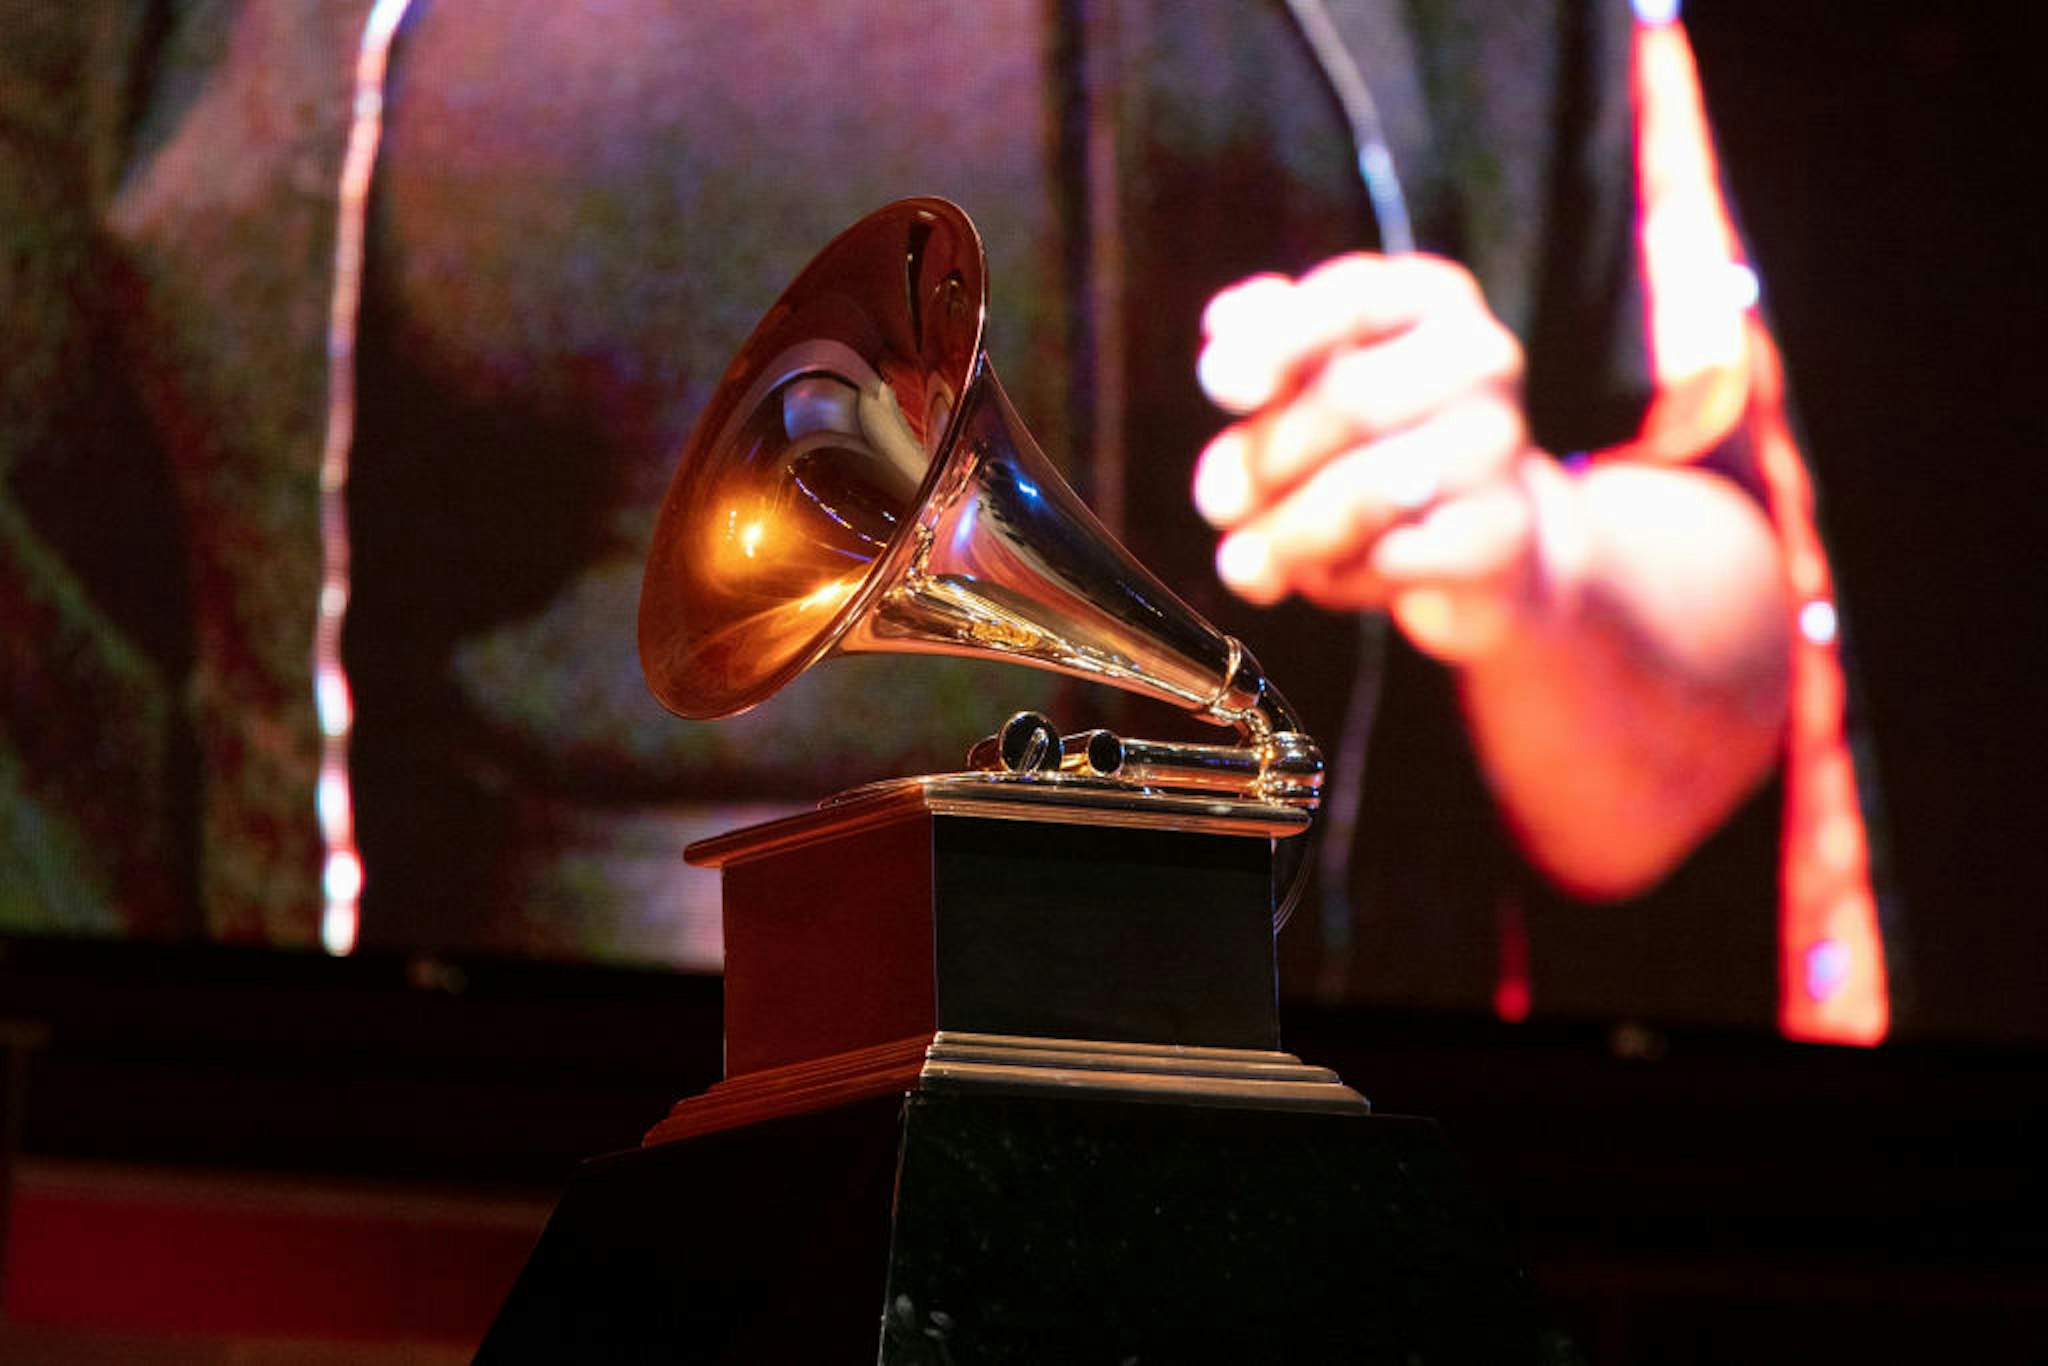 CHICAGO, ILLINOIS - SEPTEMBER 16: A view of a Grammy statue during a performance at the Chicago Chapter 60th Anniversary Concert at Millennium Park on September 16, 2021 in Chicago, Illinois. (Photo by Jeff Schear/Getty Images for The Recording Academy)